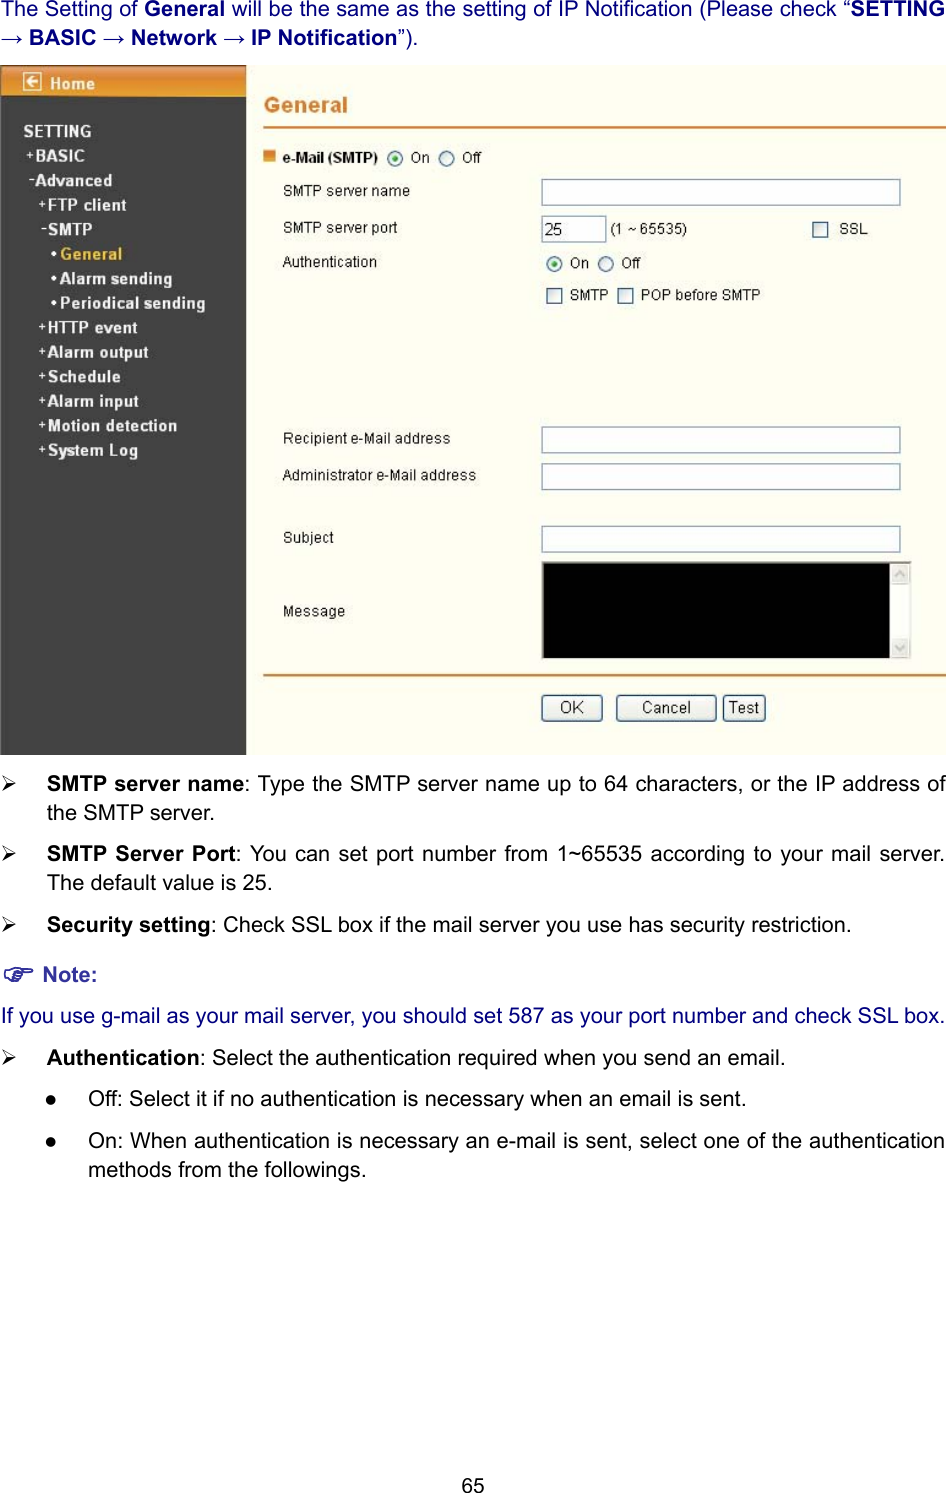 65 The Setting of General will be the same as the setting of IP Notification (Please check “SETTING → BASIC → Network → IP Notification”).  ¾ SMTP server name: Type the SMTP server name up to 64 characters, or the IP address of the SMTP server. ¾ SMTP Server Port: You can set port number from 1~65535 according to your mail server. The default value is 25. ¾ Security setting: Check SSL box if the mail server you use has security restriction. ) Note: If you use g-mail as your mail server, you should set 587 as your port number and check SSL box. ¾ Authentication: Select the authentication required when you send an email.   z Off: Select it if no authentication is necessary when an email is sent. z On: When authentication is necessary an e-mail is sent, select one of the authentication methods from the followings.   